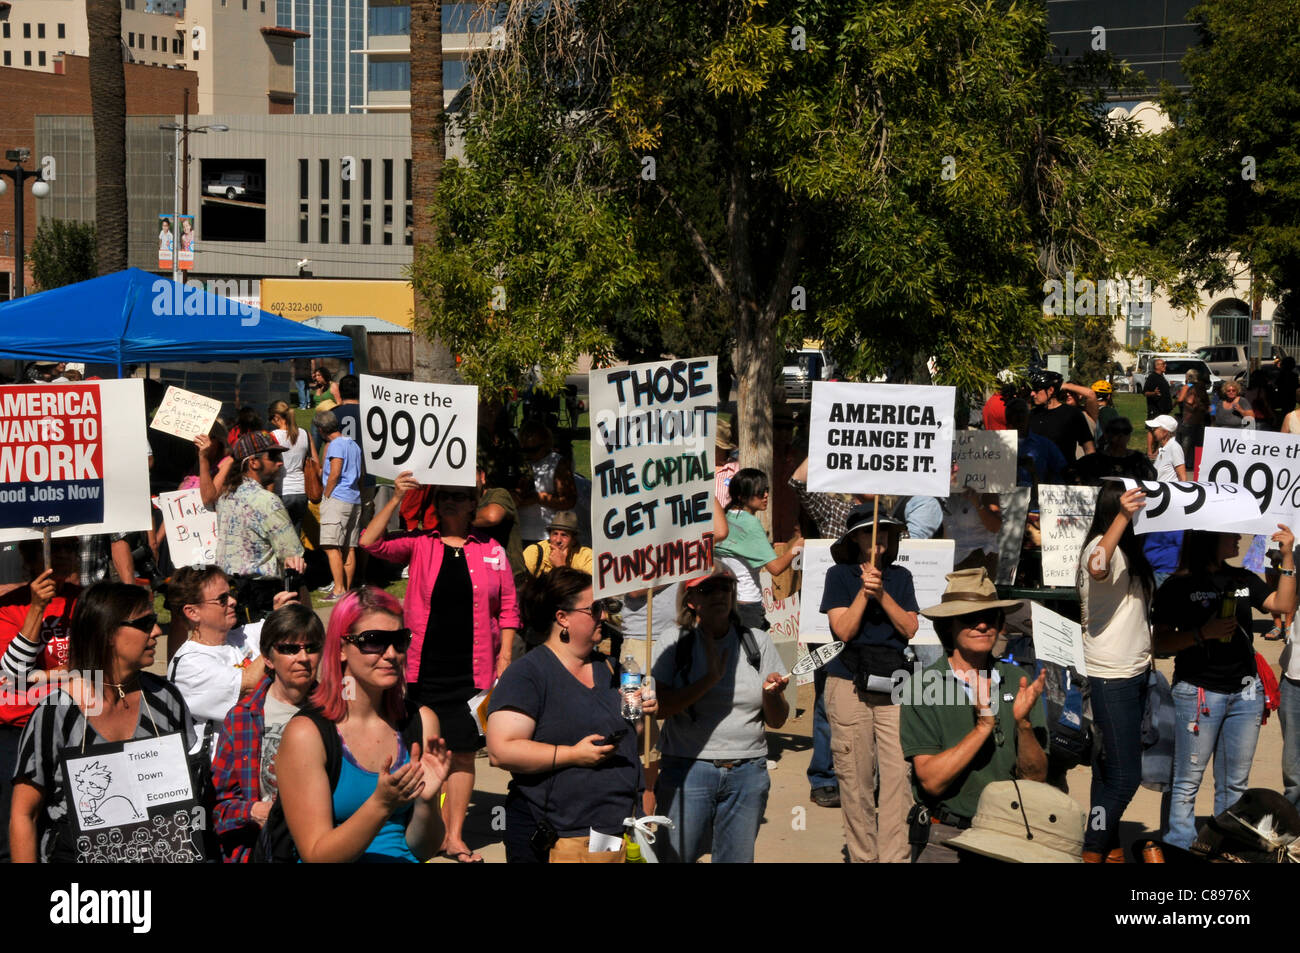 About 1,000 demonstrators participated in Occupy Tucson at Military Plaza in Armory Park, Tucson, Arizona, USA.  The Occupy Tucson organizers created the movement in solidarity with the Occupy Wall Street movement in New York and the Occupy Together movement across the USA. Stock Photo